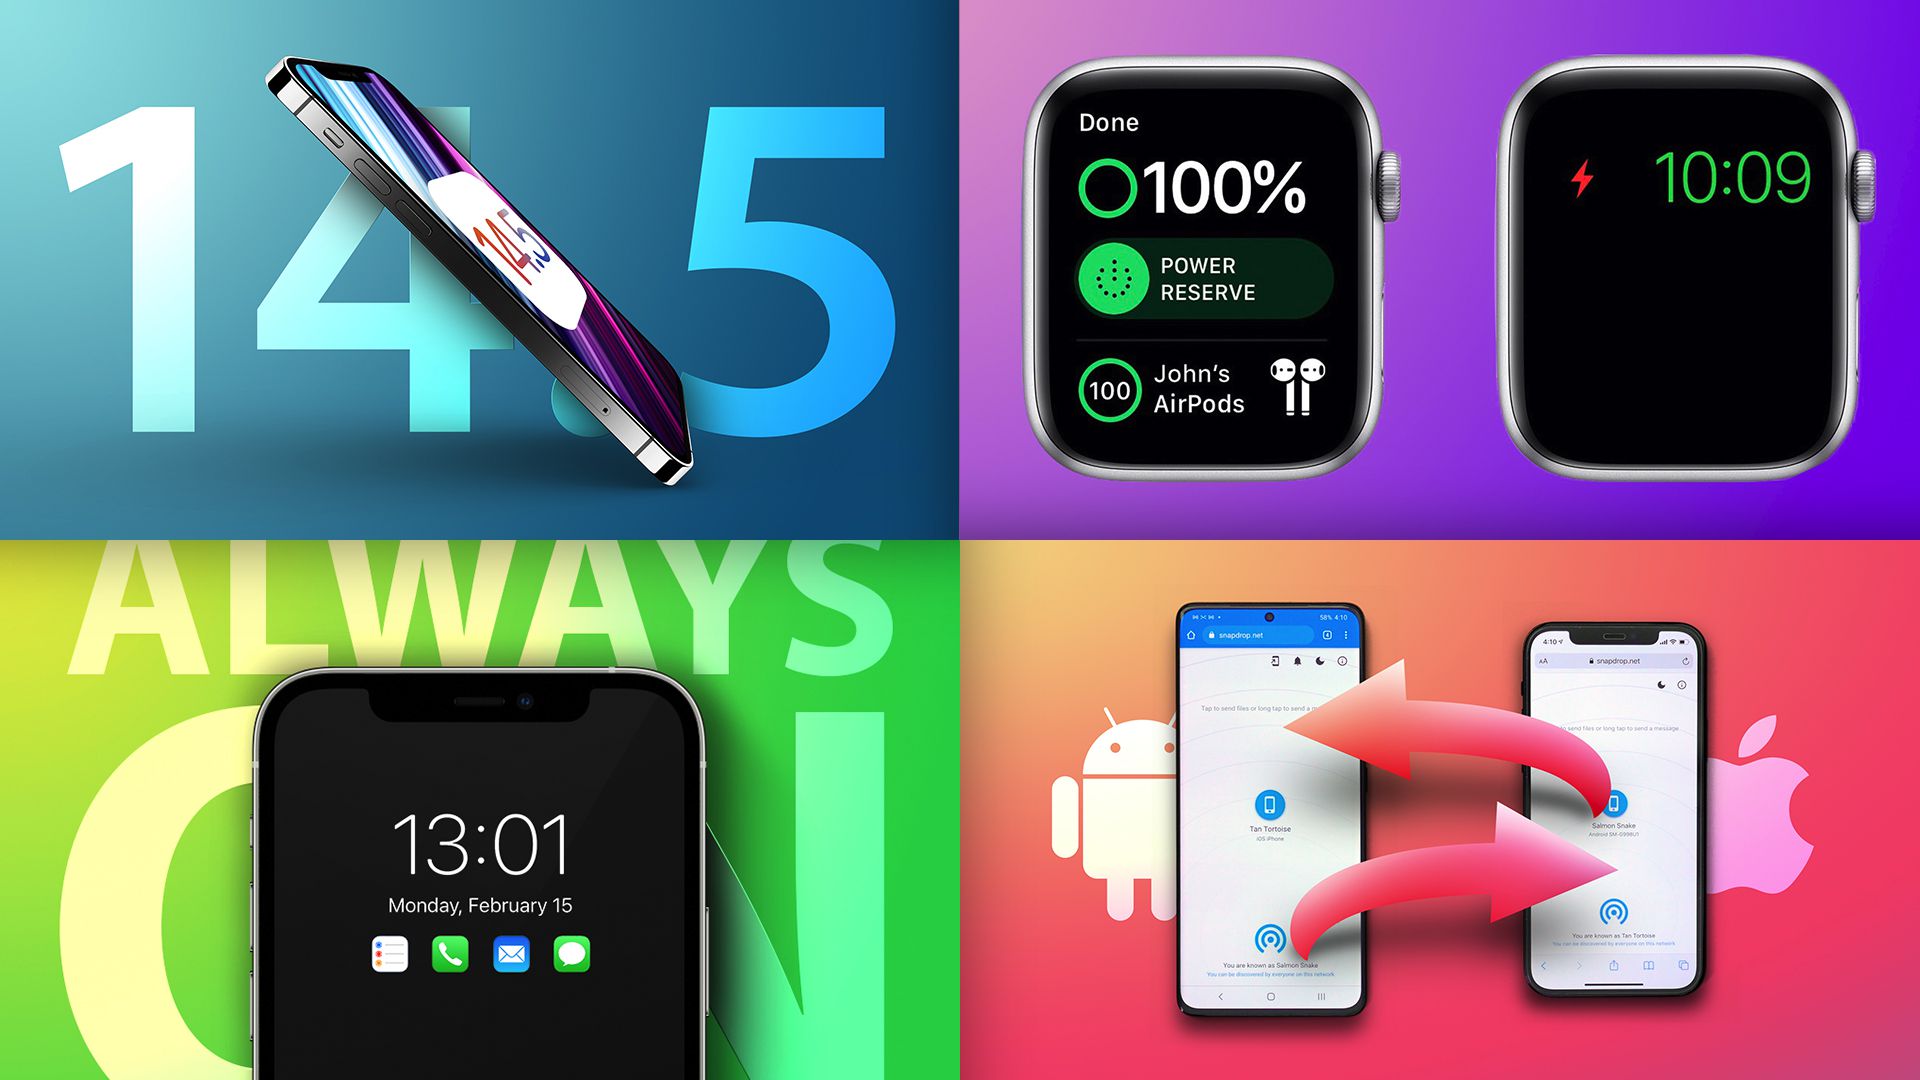 Top Stories: More iOS 14.5 Beta Changes, iPhone 13 Rumors, Apple Watch Charging Issue Resolved